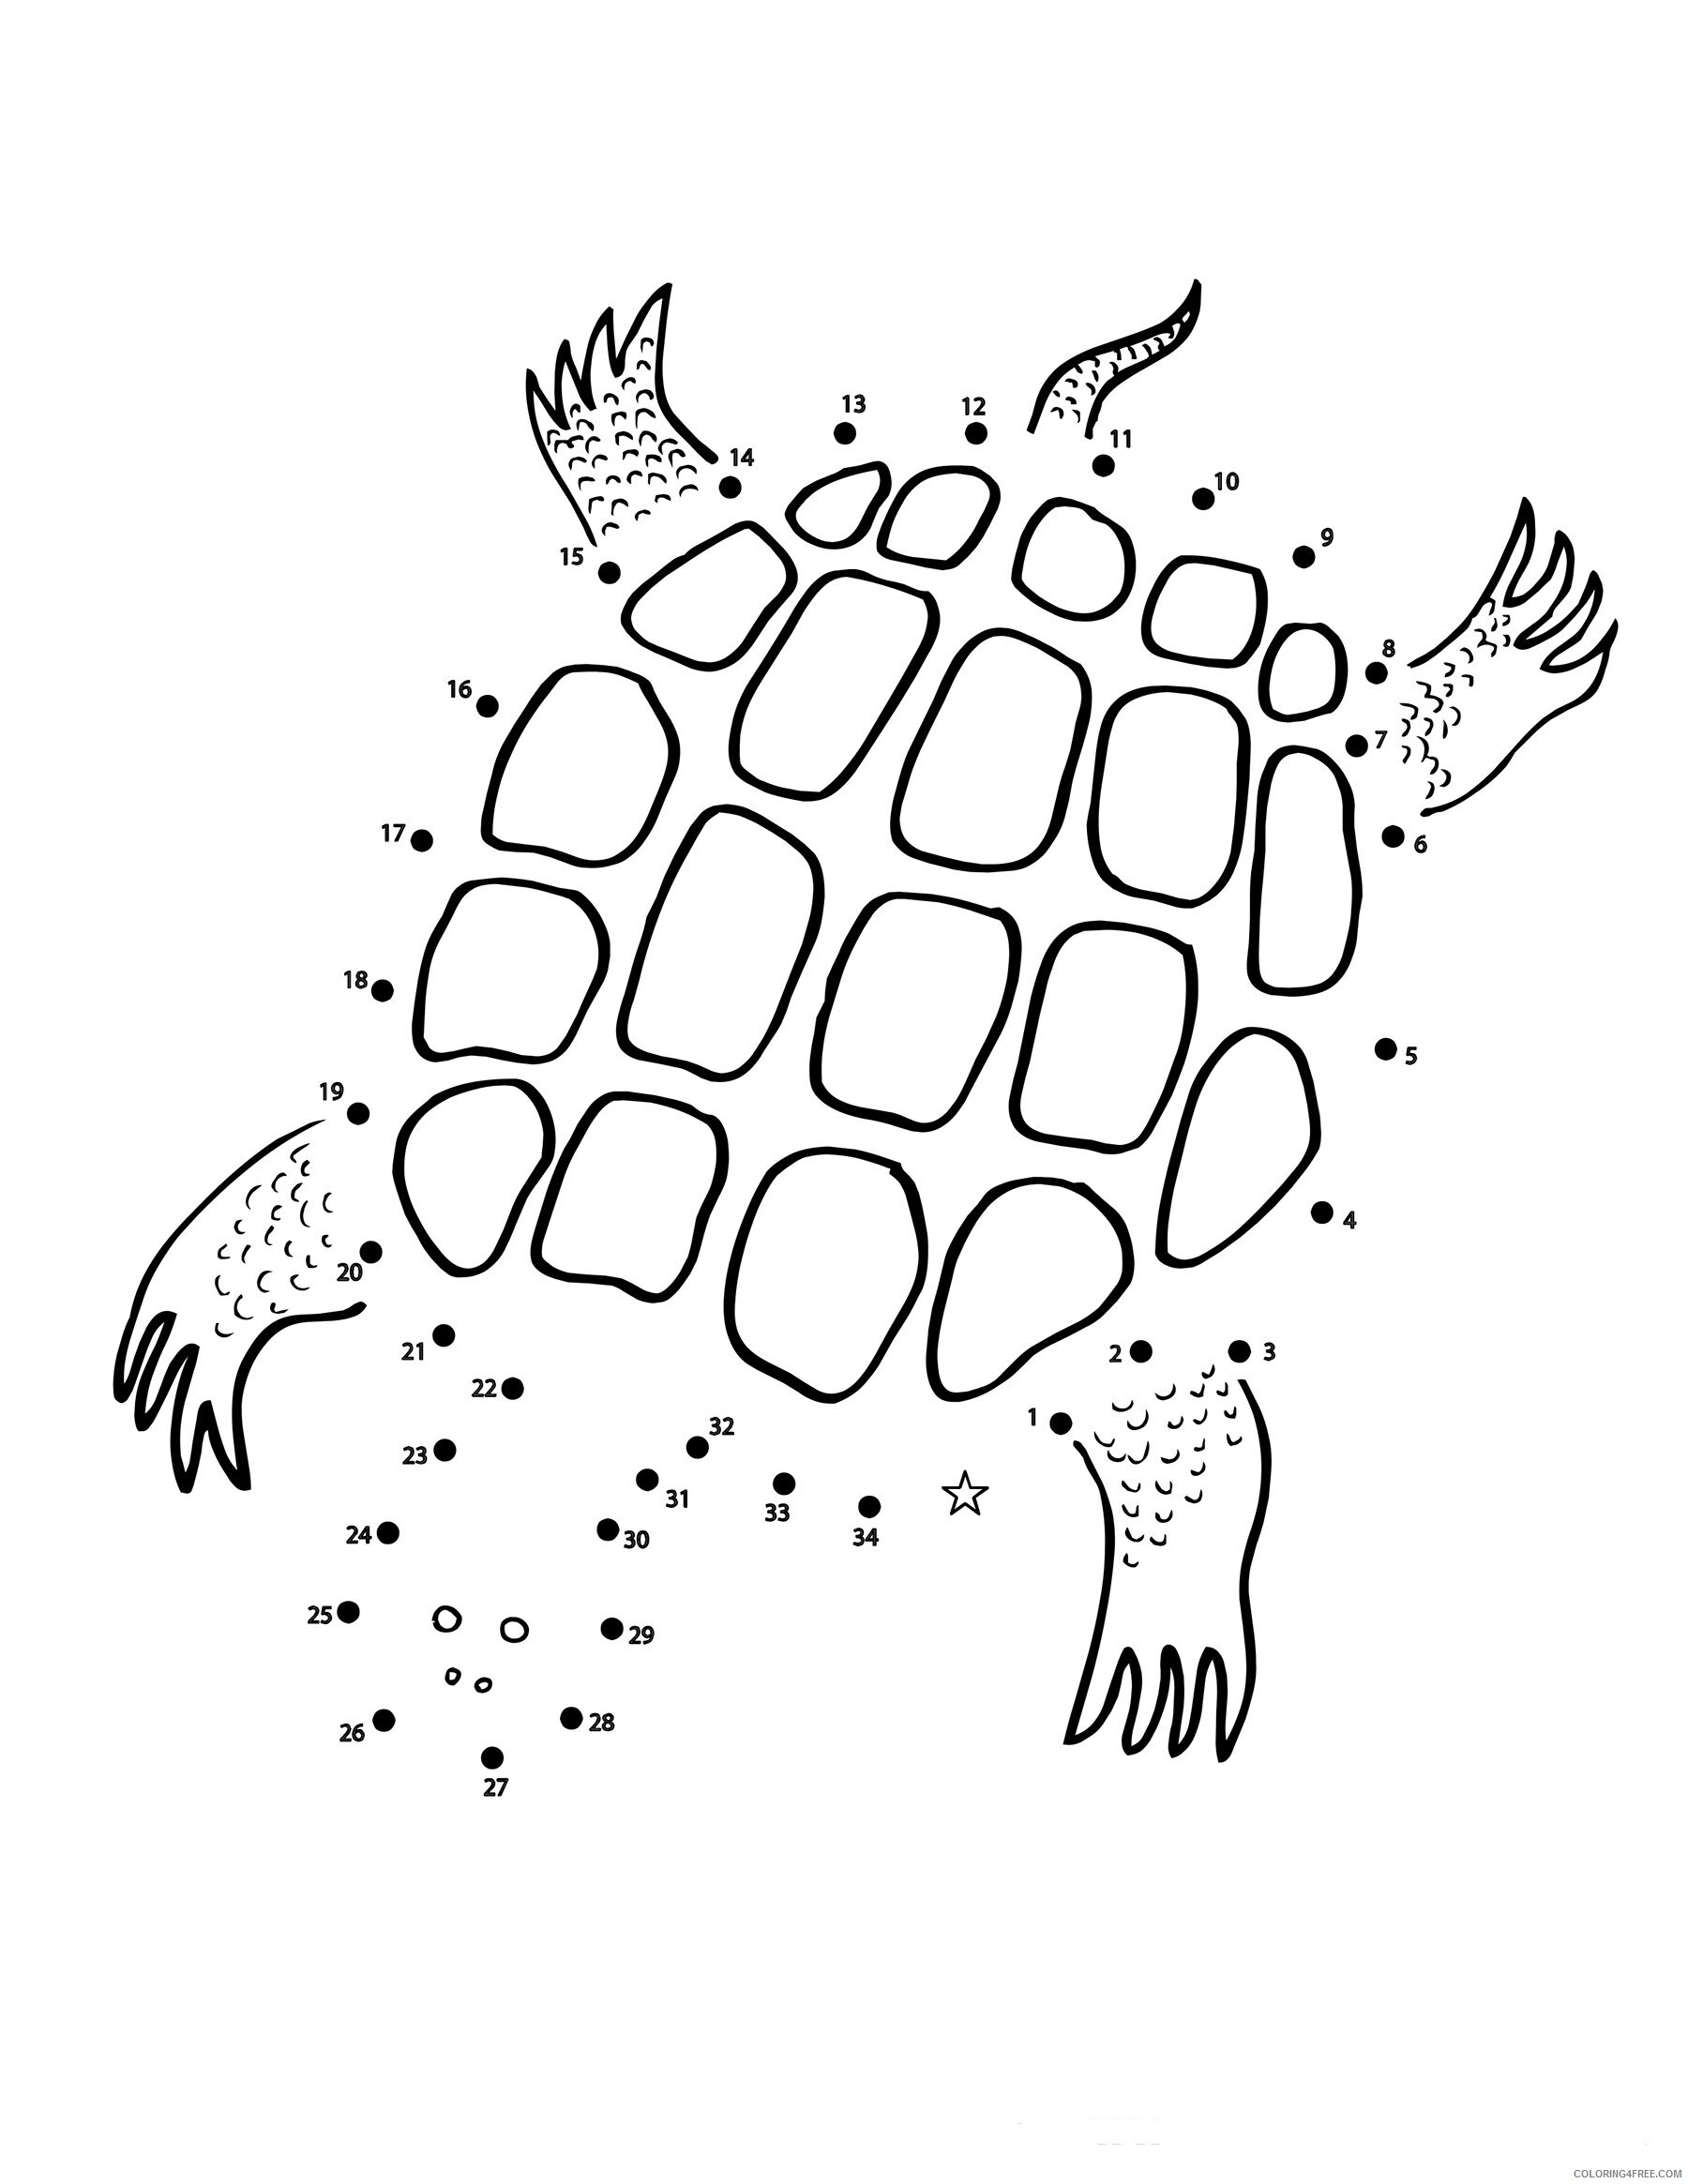 Dot to Dot Coloring Pages Educational turtle dot to dot free ninja 2020 1400 Coloring4free